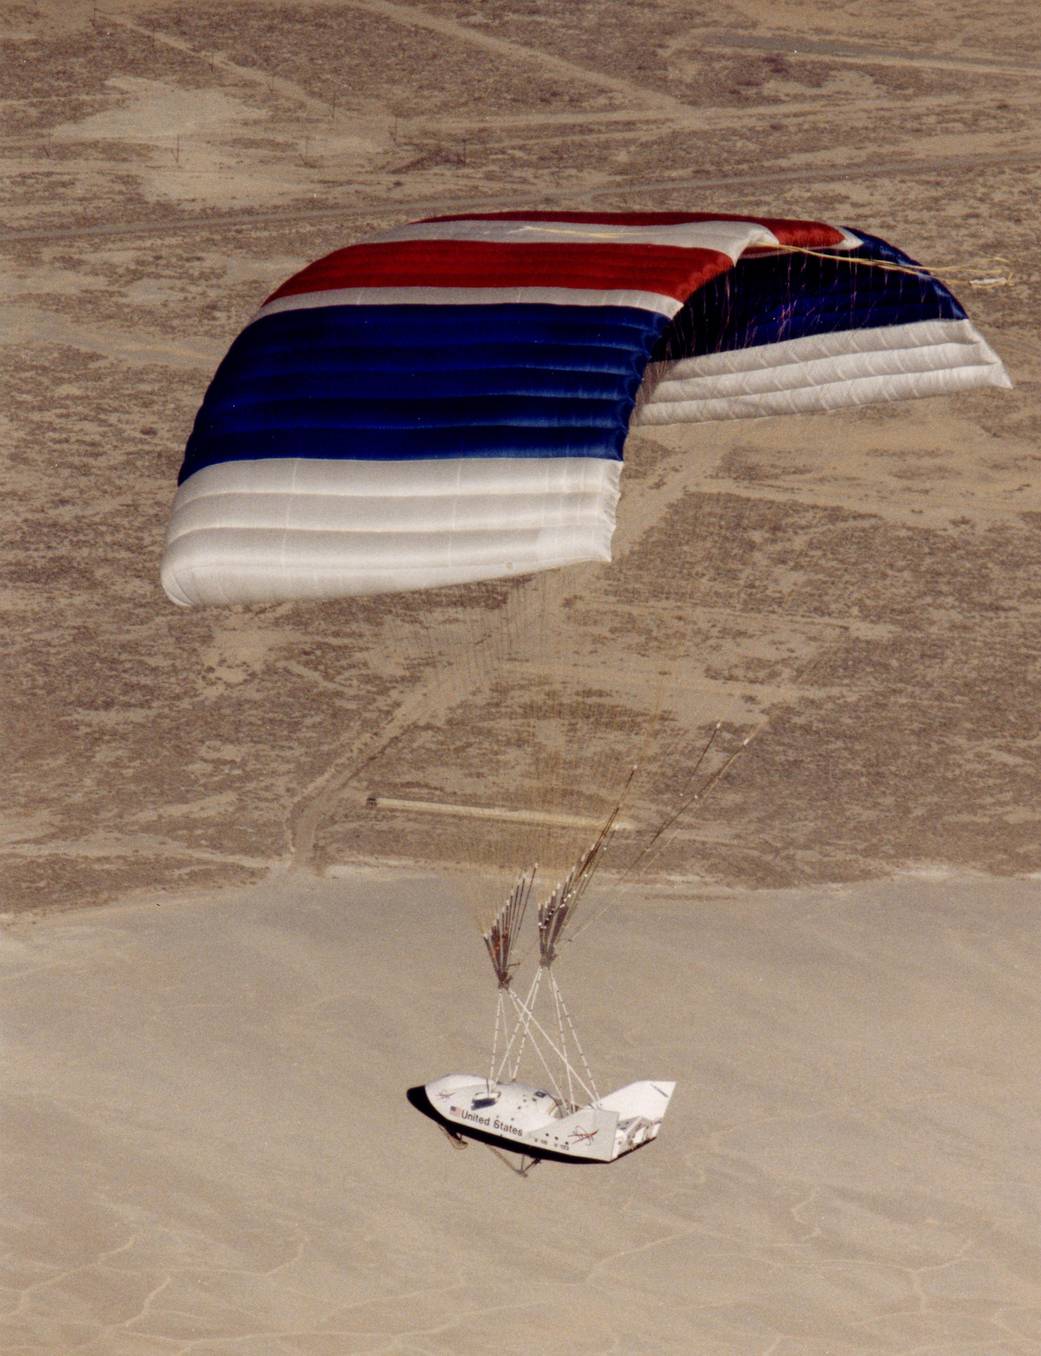 X-38 Descends to Lakebed Landing under its Steerable Parafoil